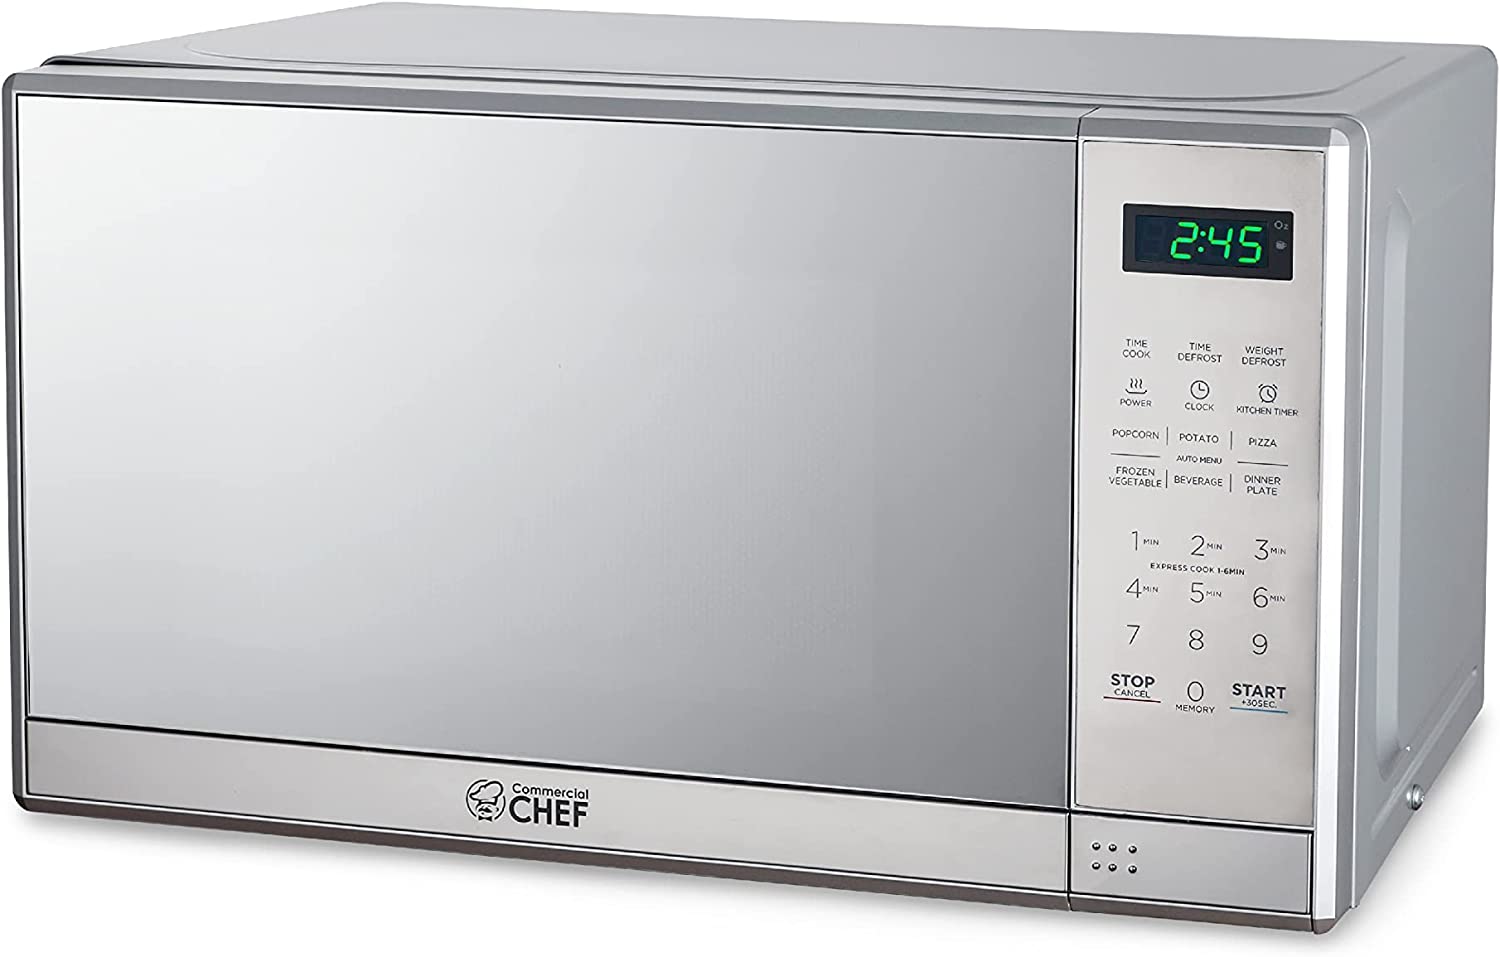 https://bigbigmart.com/wp-content/uploads/2023/07/COMMERCIAL-CHEF-Small-Microwave-0.7-Cu.-Ft.-Countertop-Microwave-with-Digital-Display-Stainless-Steel-Microwave-with-10-Power-Levels-Outstanding-Portable-Microwave-with-Convenient-Push-Button.jpg